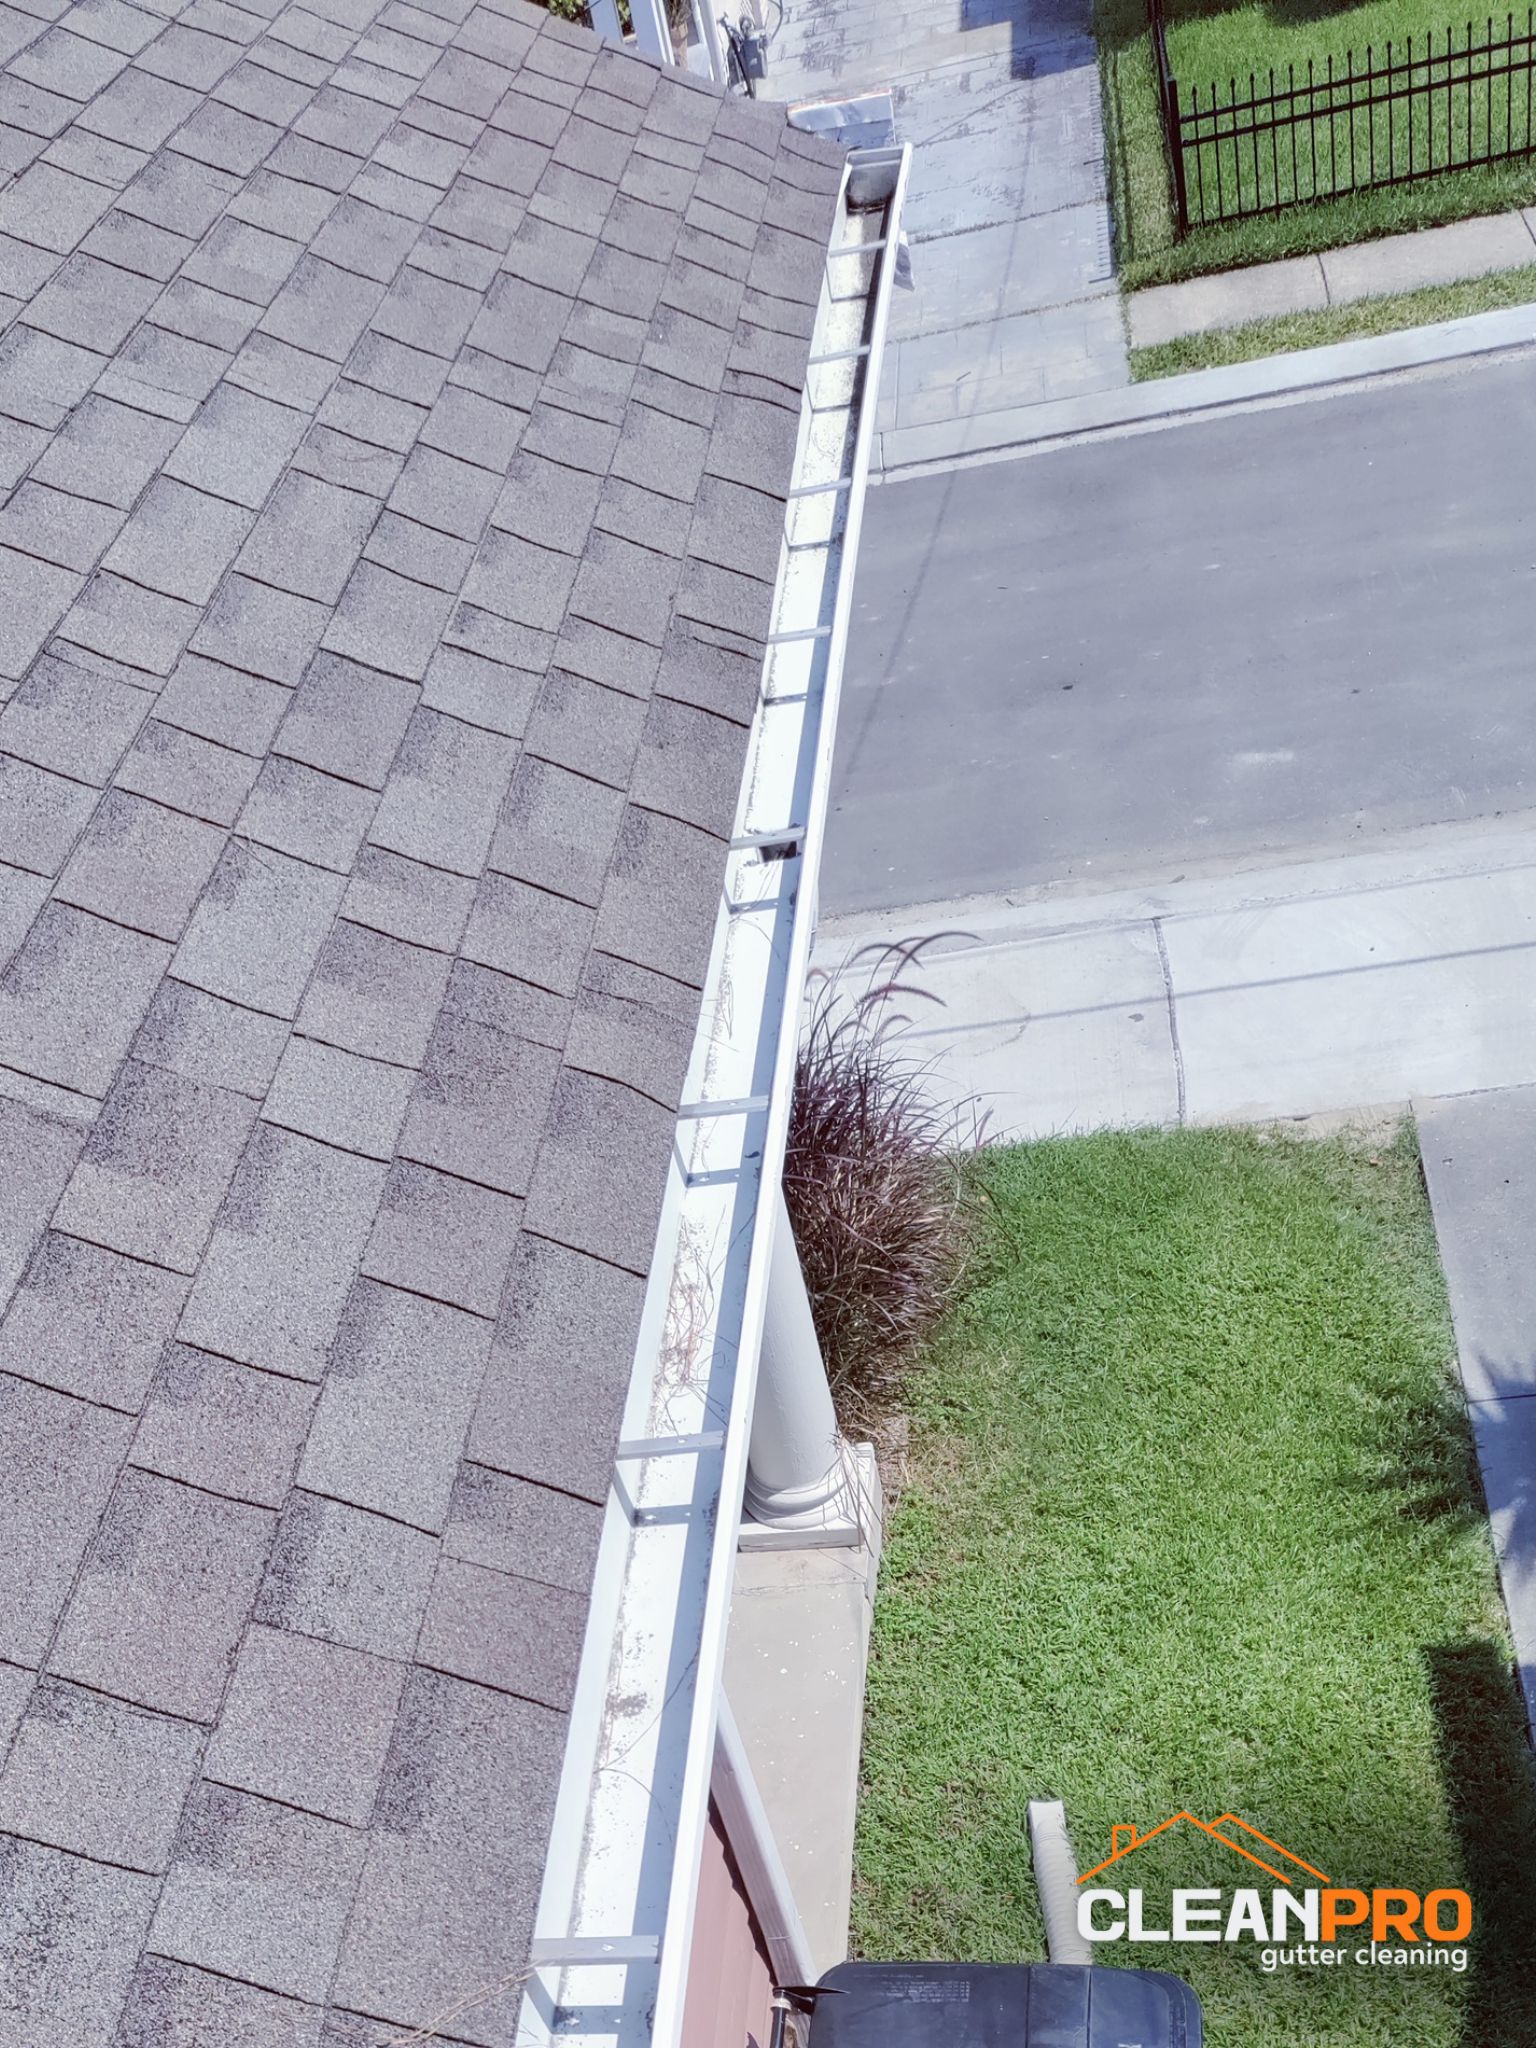 Local Gutter Cleaning in Walpole